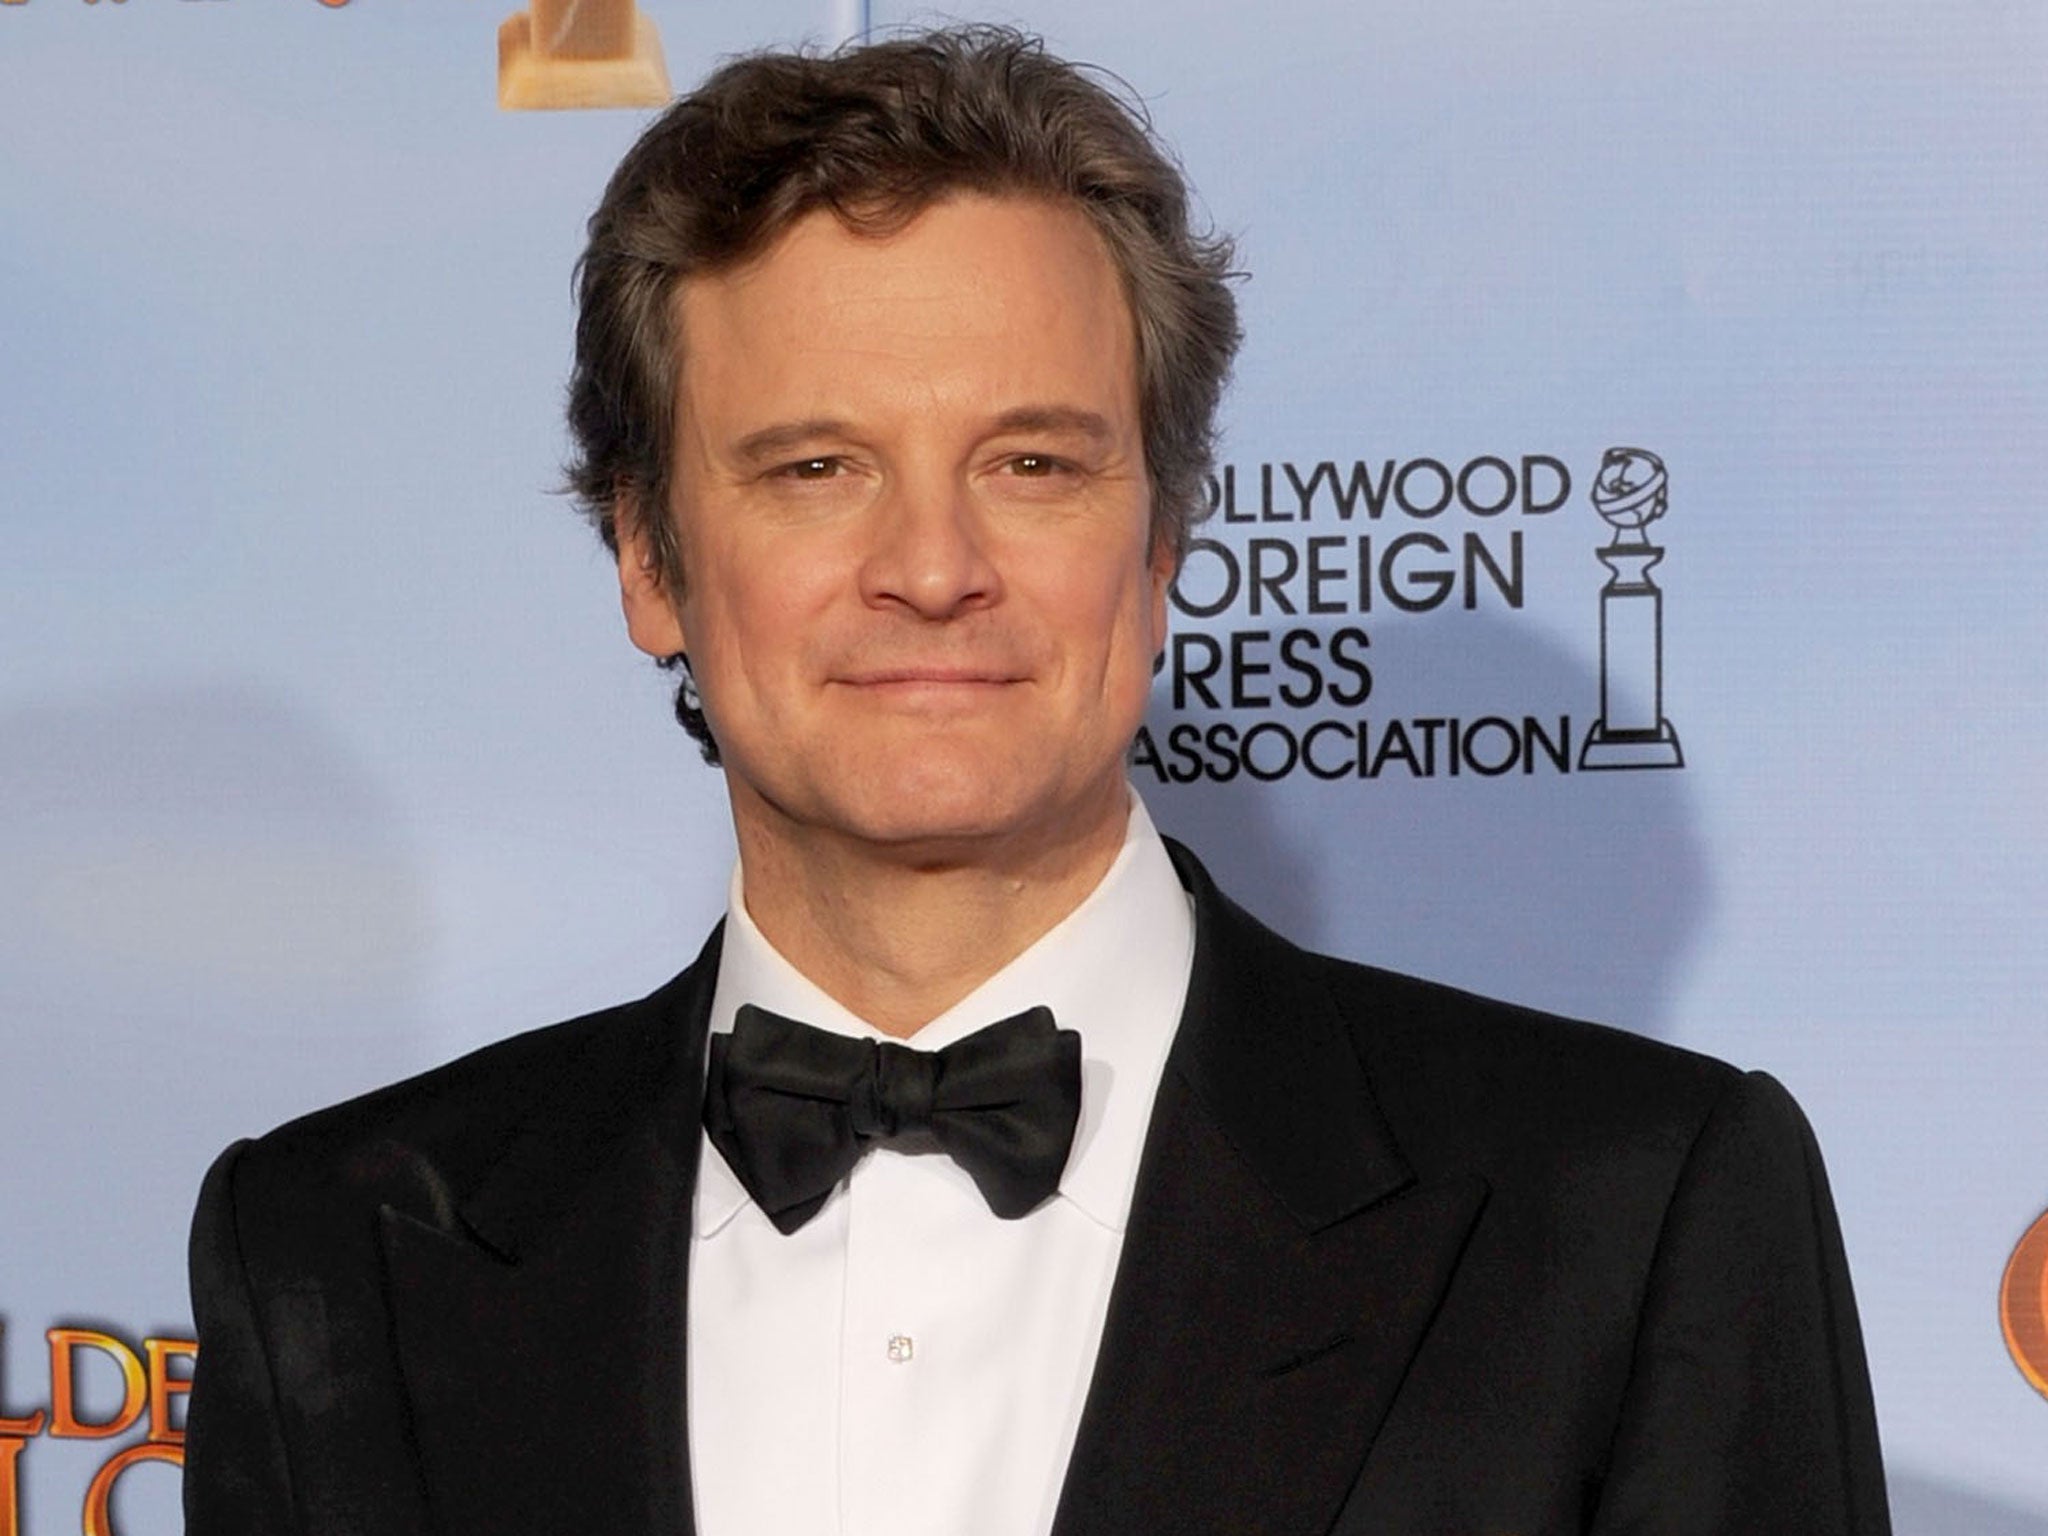 Colin Firth is rather popular with the ladies